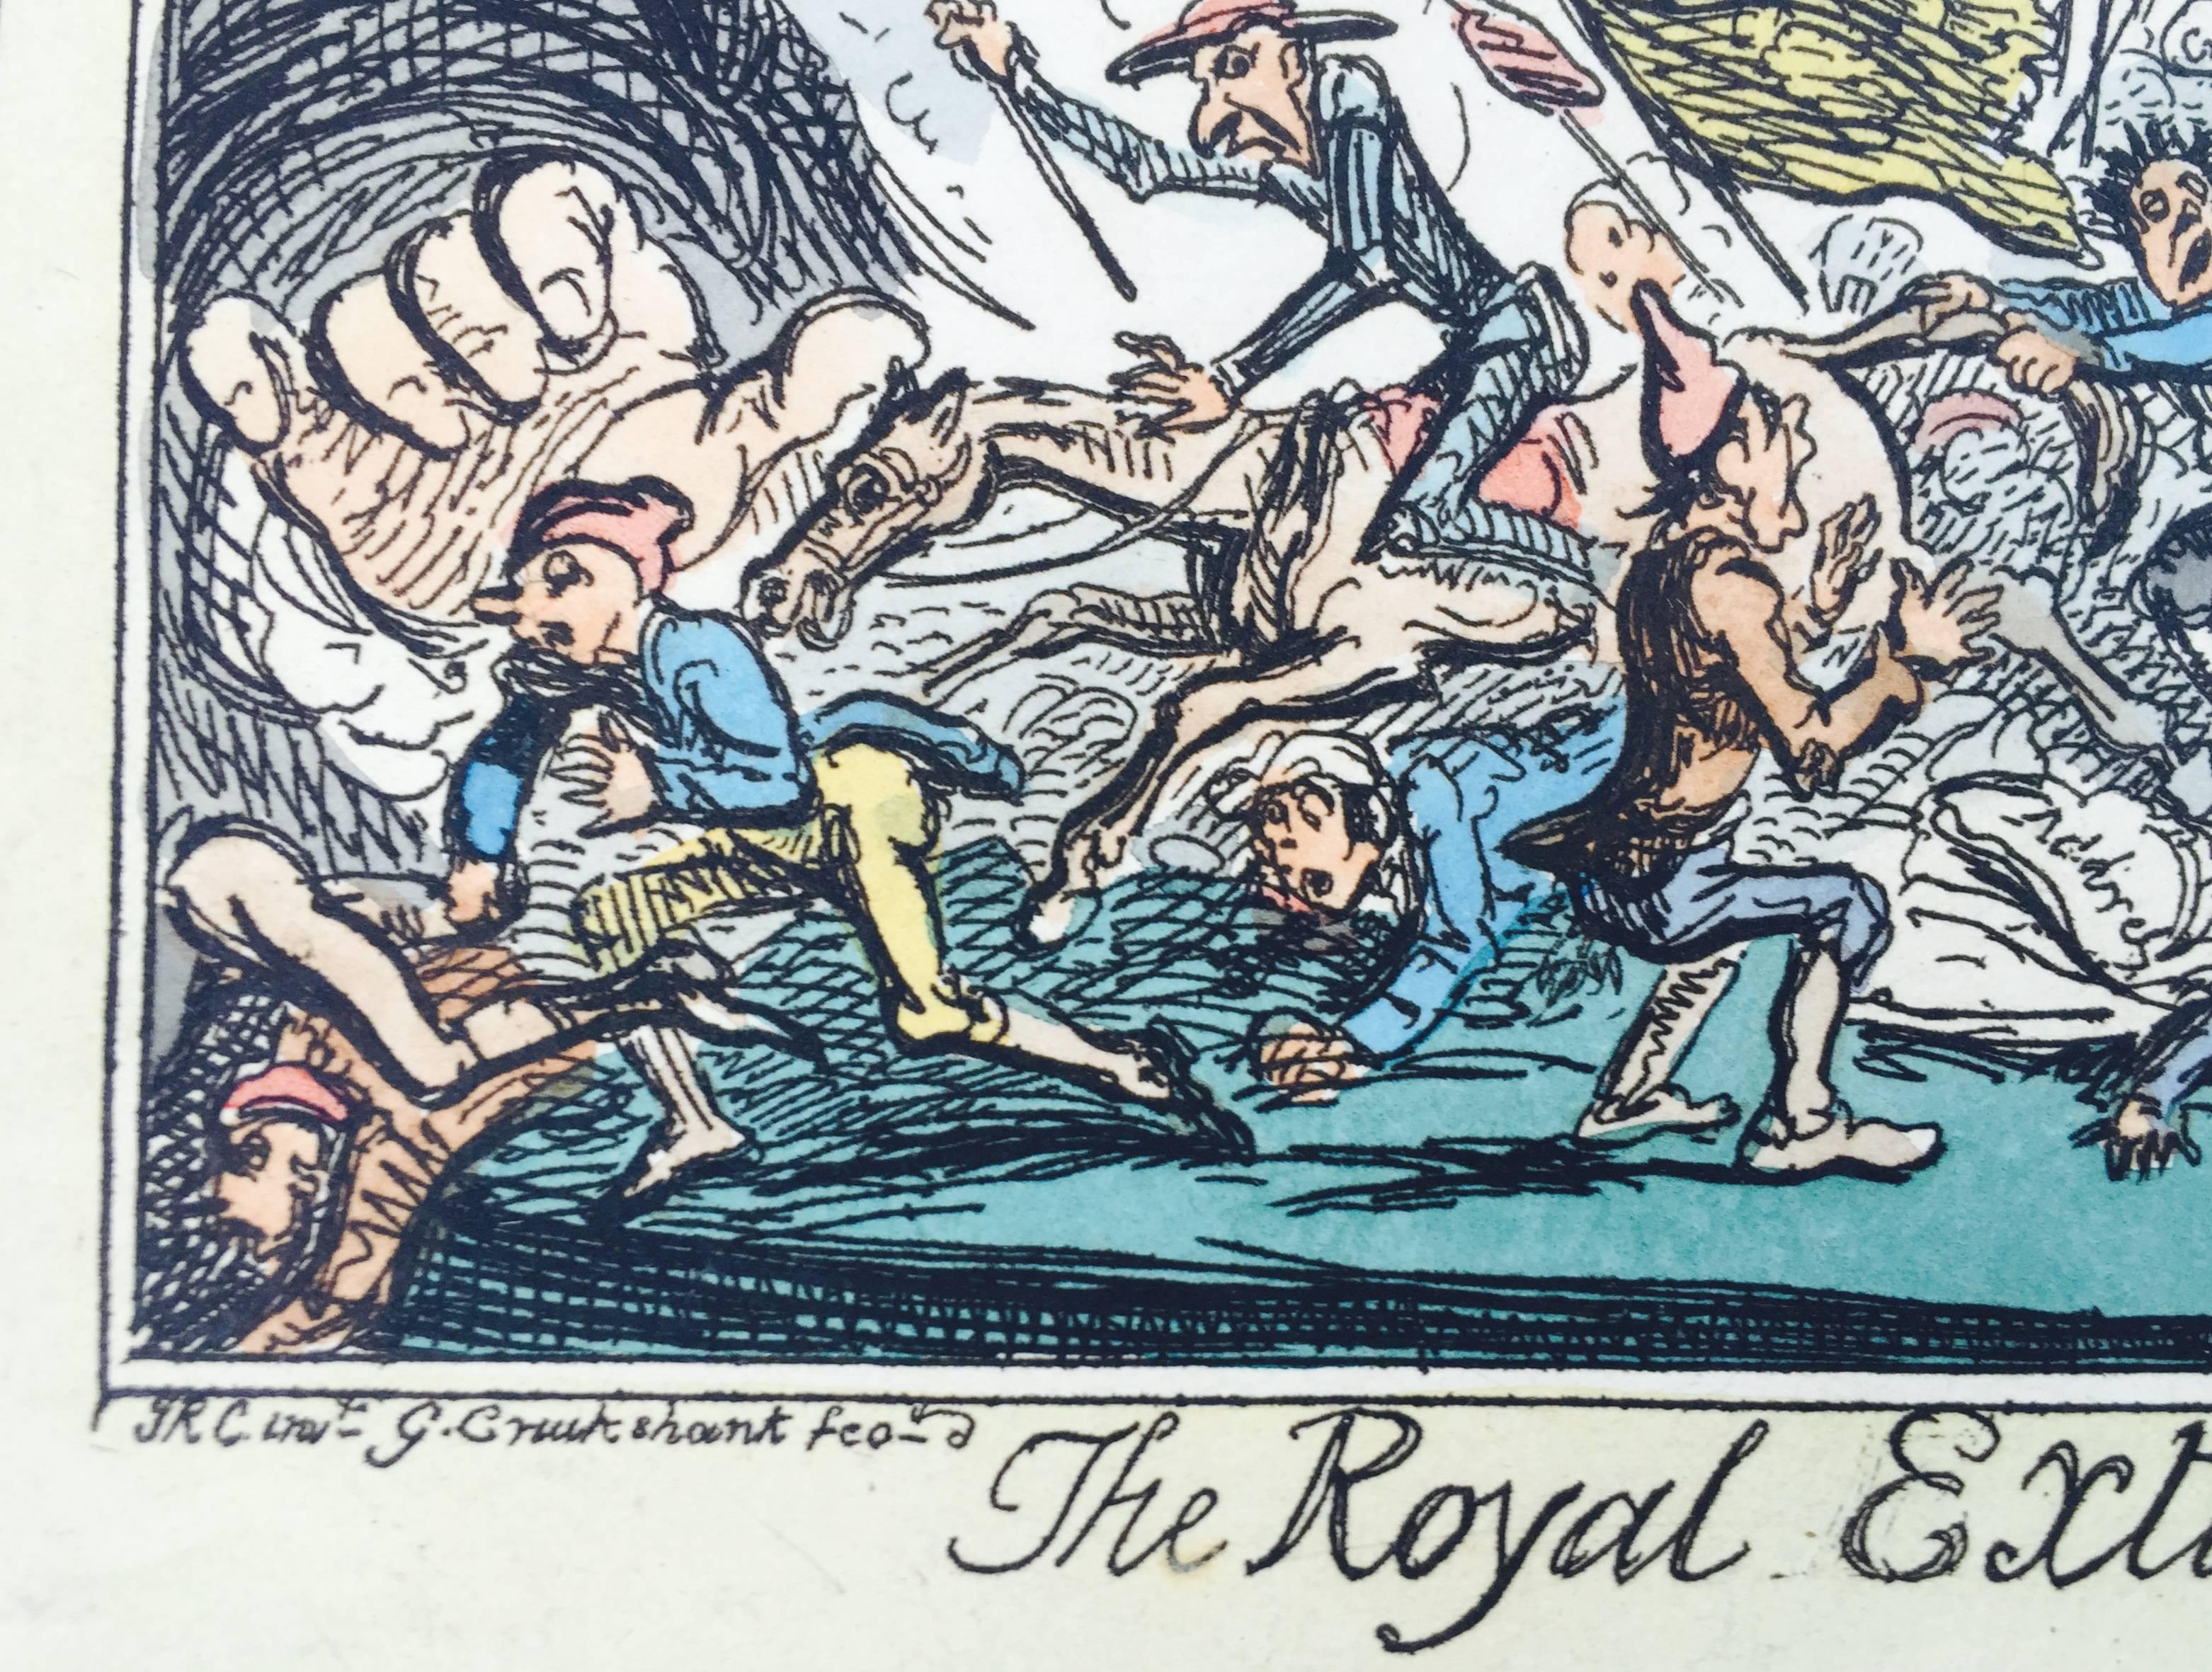 The Royal Extinguisher or The King of Brobdingnag and the Lilliputians - Gray Figurative Print by George Cruikshank